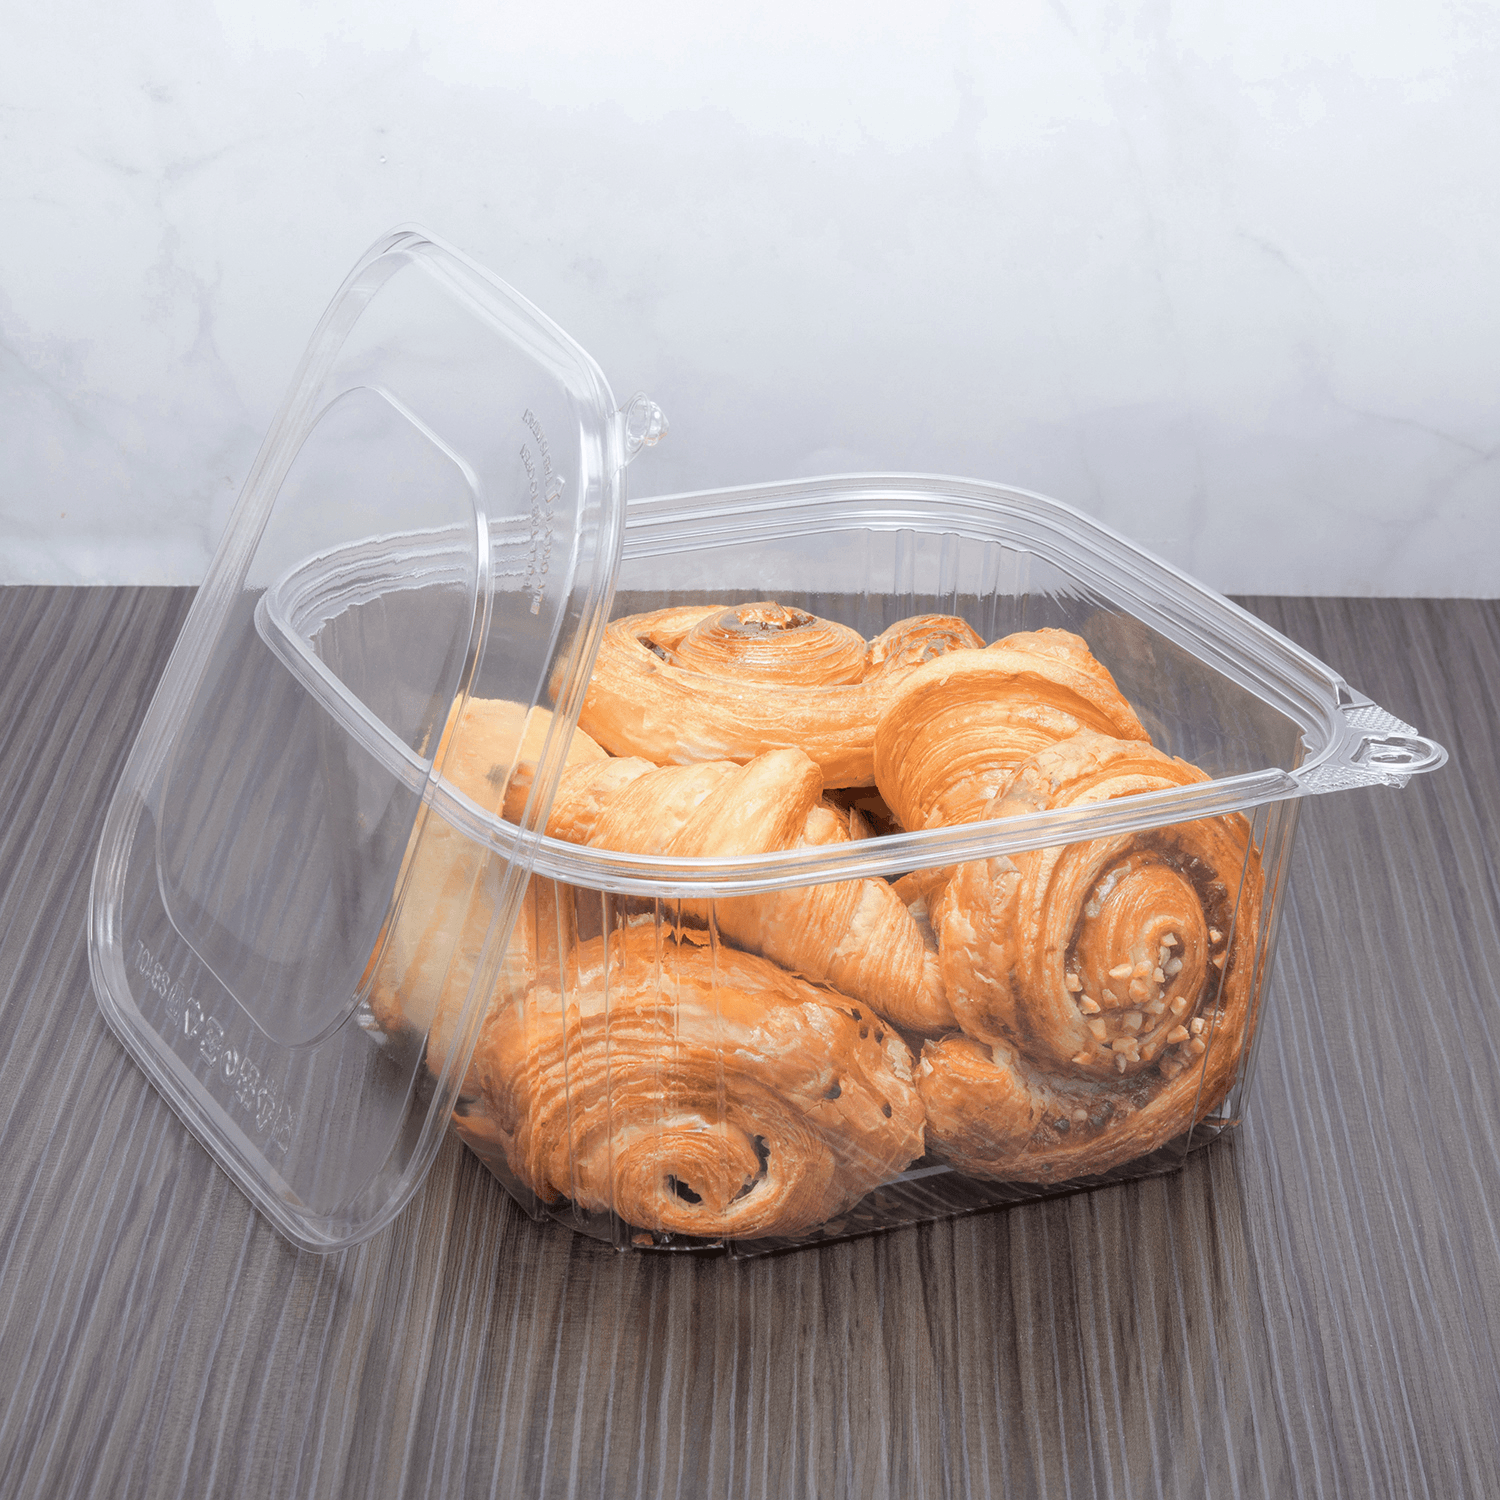 Clear Karat 64 oz PET Tamper Resistant Deli Container with Flat Lid  with baked goods